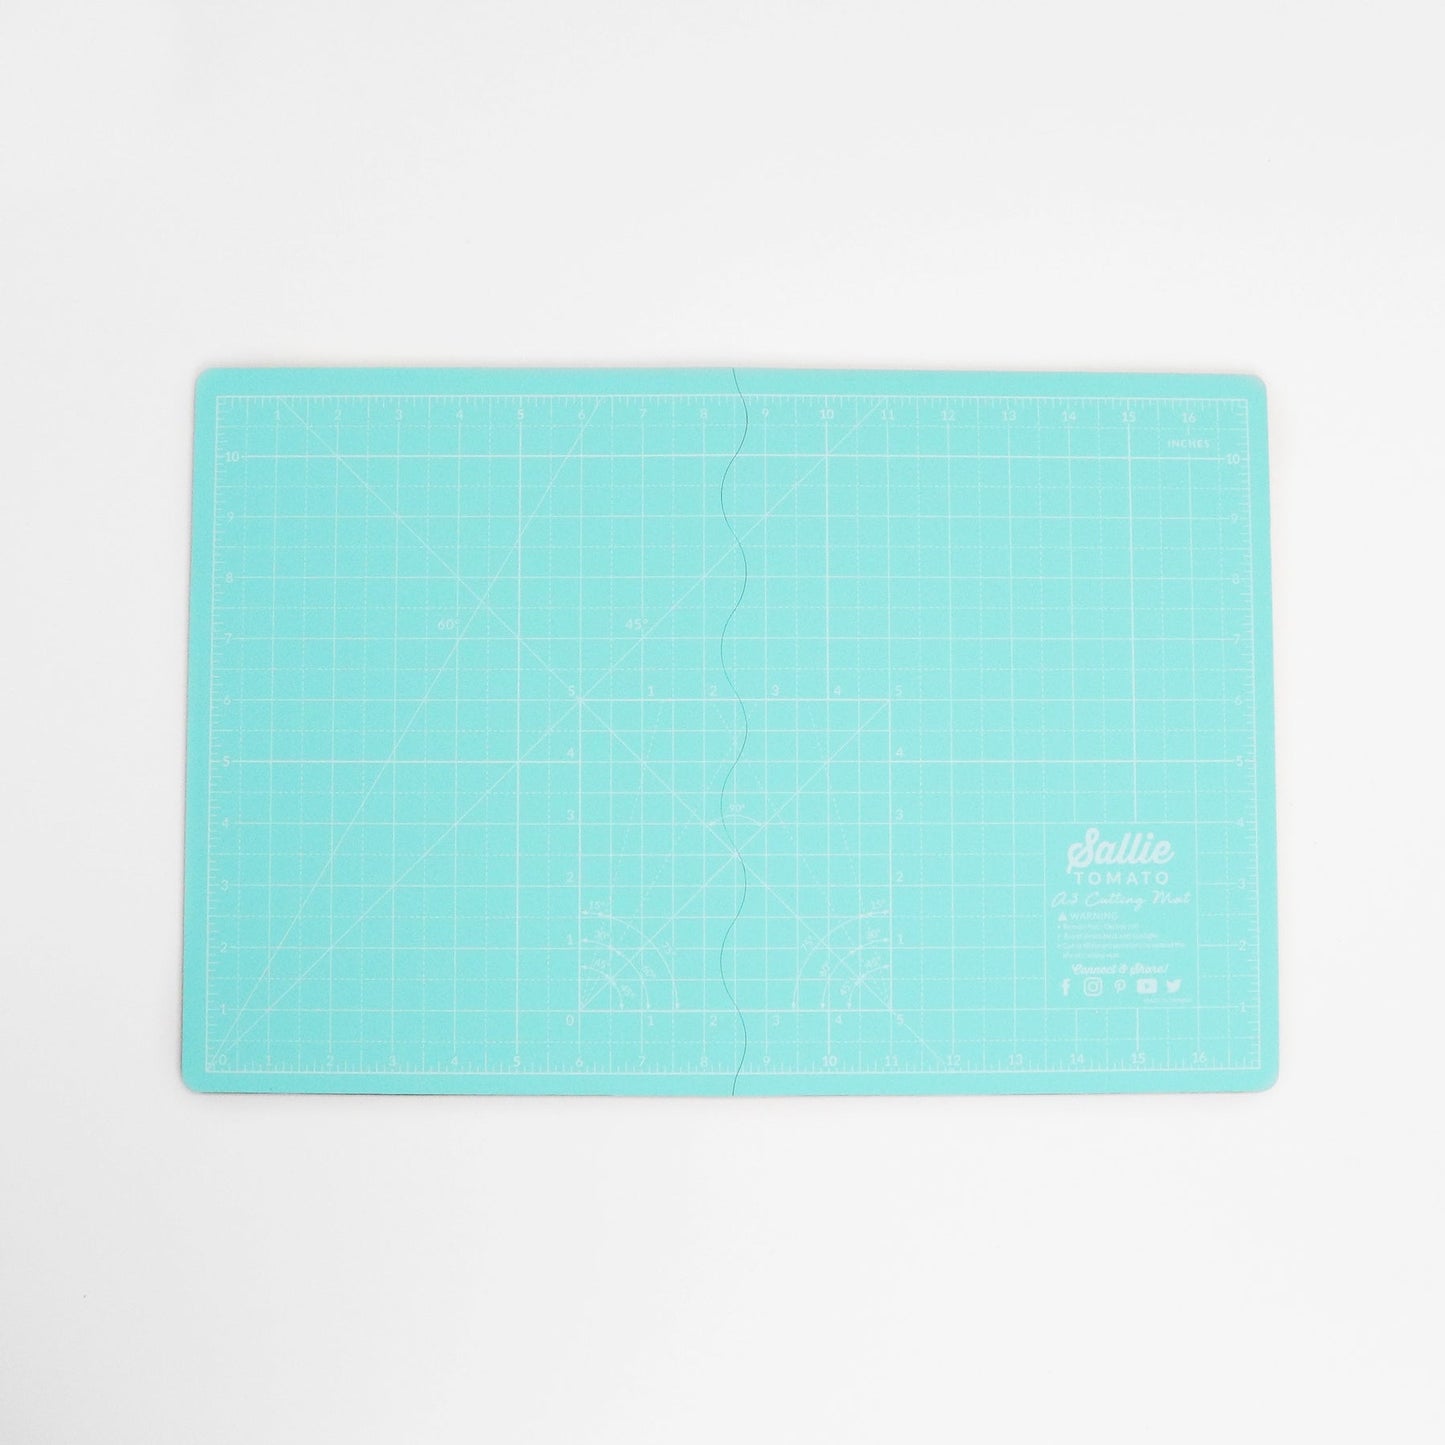 Sallie Tomato A3 Foldable Cutting Mat *Preorder*